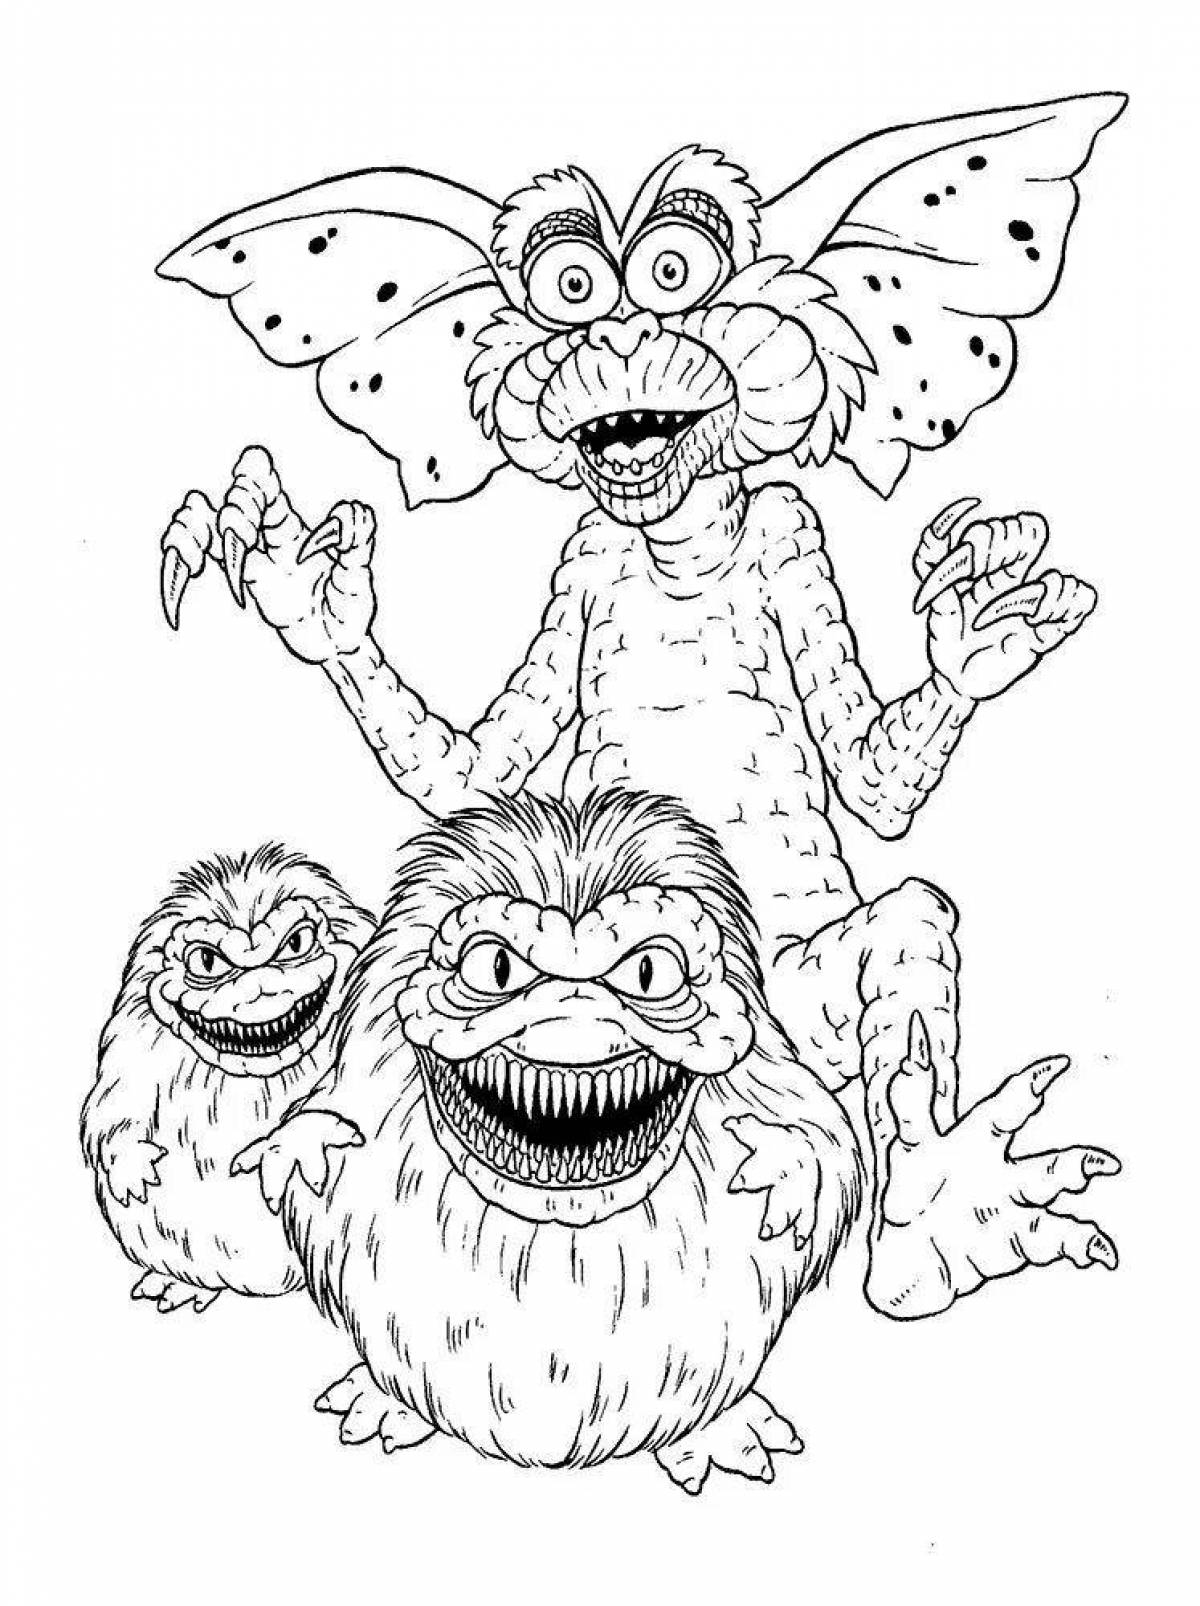 Crazy monster coloring pages for kids